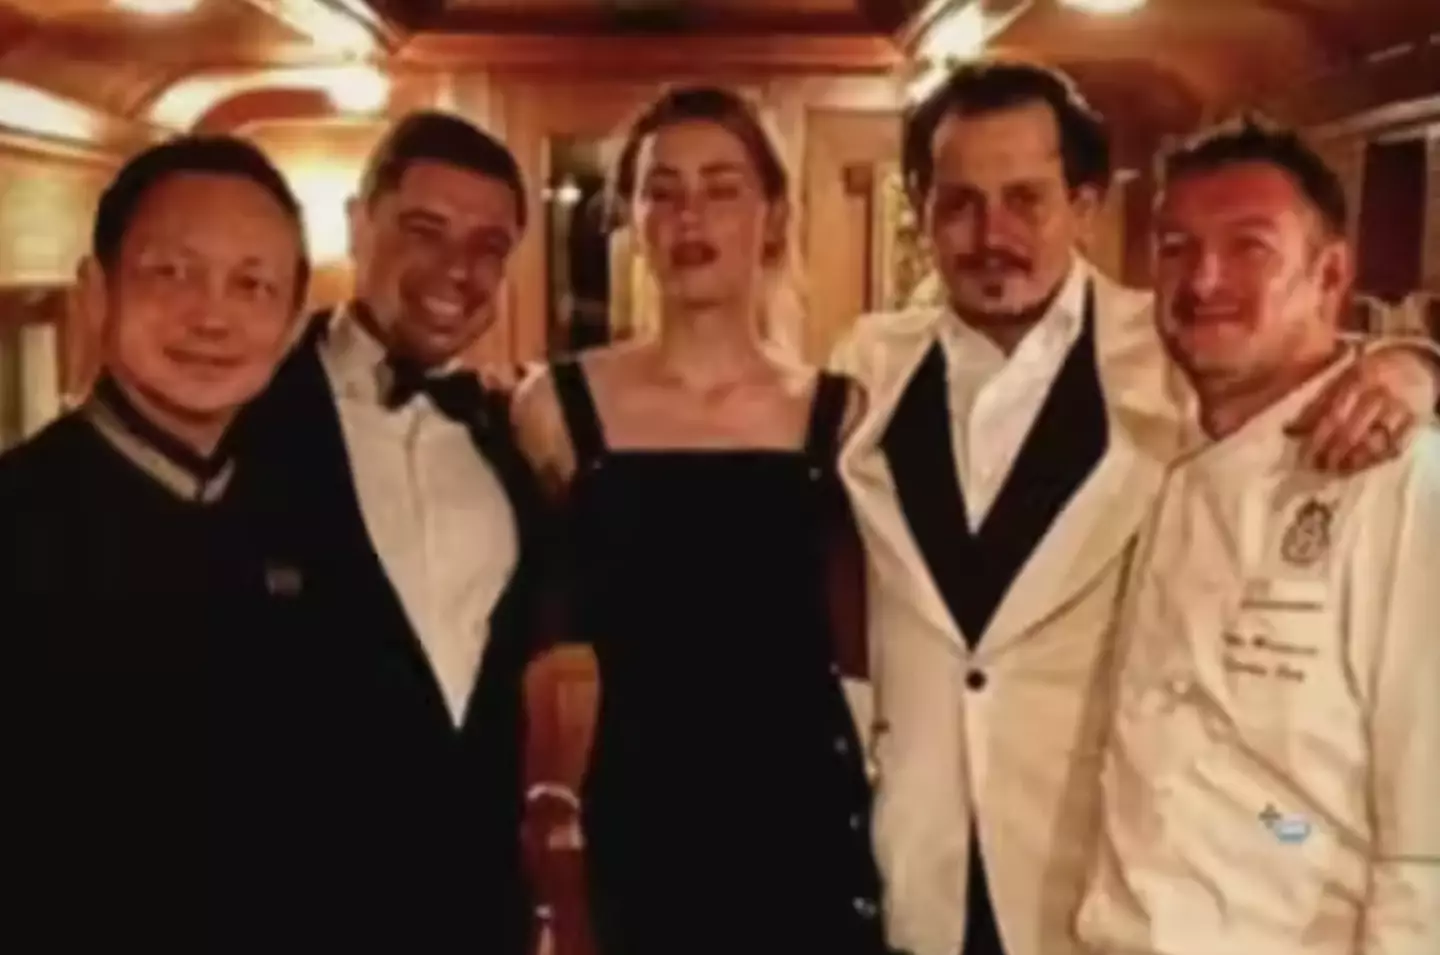 Security guard Malcolm Connelly took a picture of Amber Heard and Johnny Depp on their honeymoon.